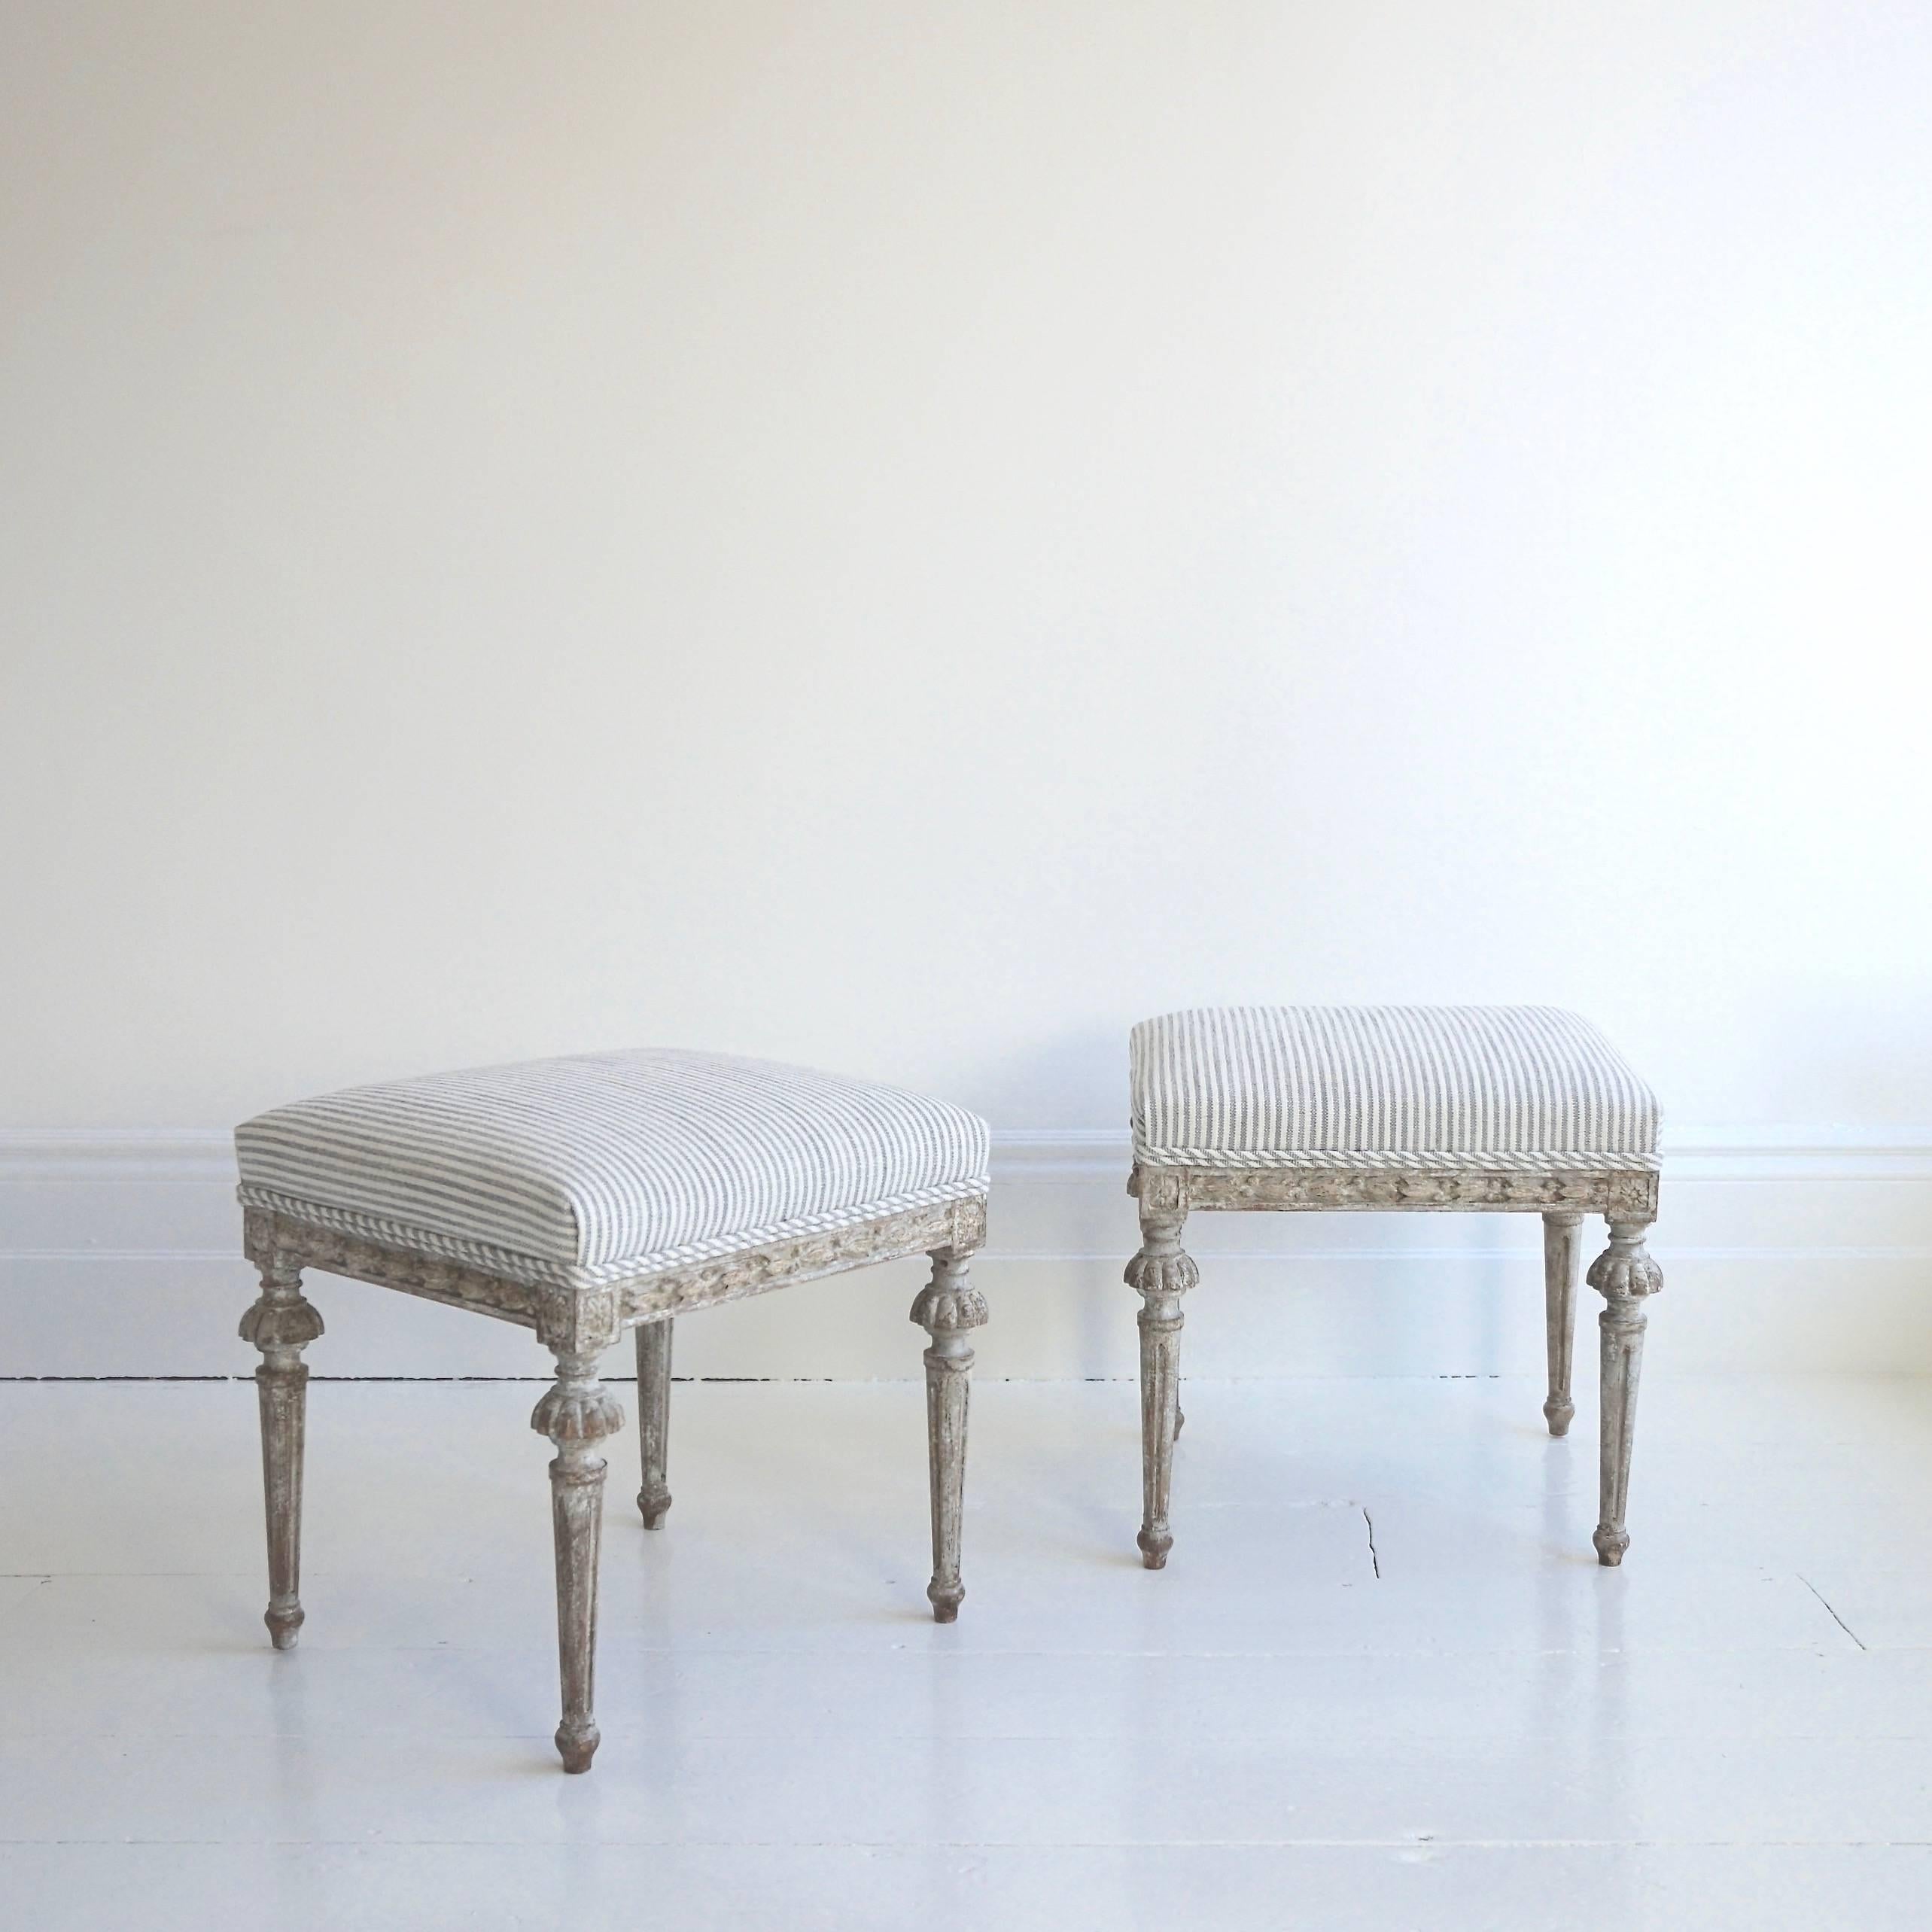 An exquisite and very fine pair of hand-carved early 19th century Gustavian period stools in their stunning original color, recently upholstered in beautiful Designers Guild grey ticking, Swedish, circa 1810.

Continental US Shipping:
We ship to